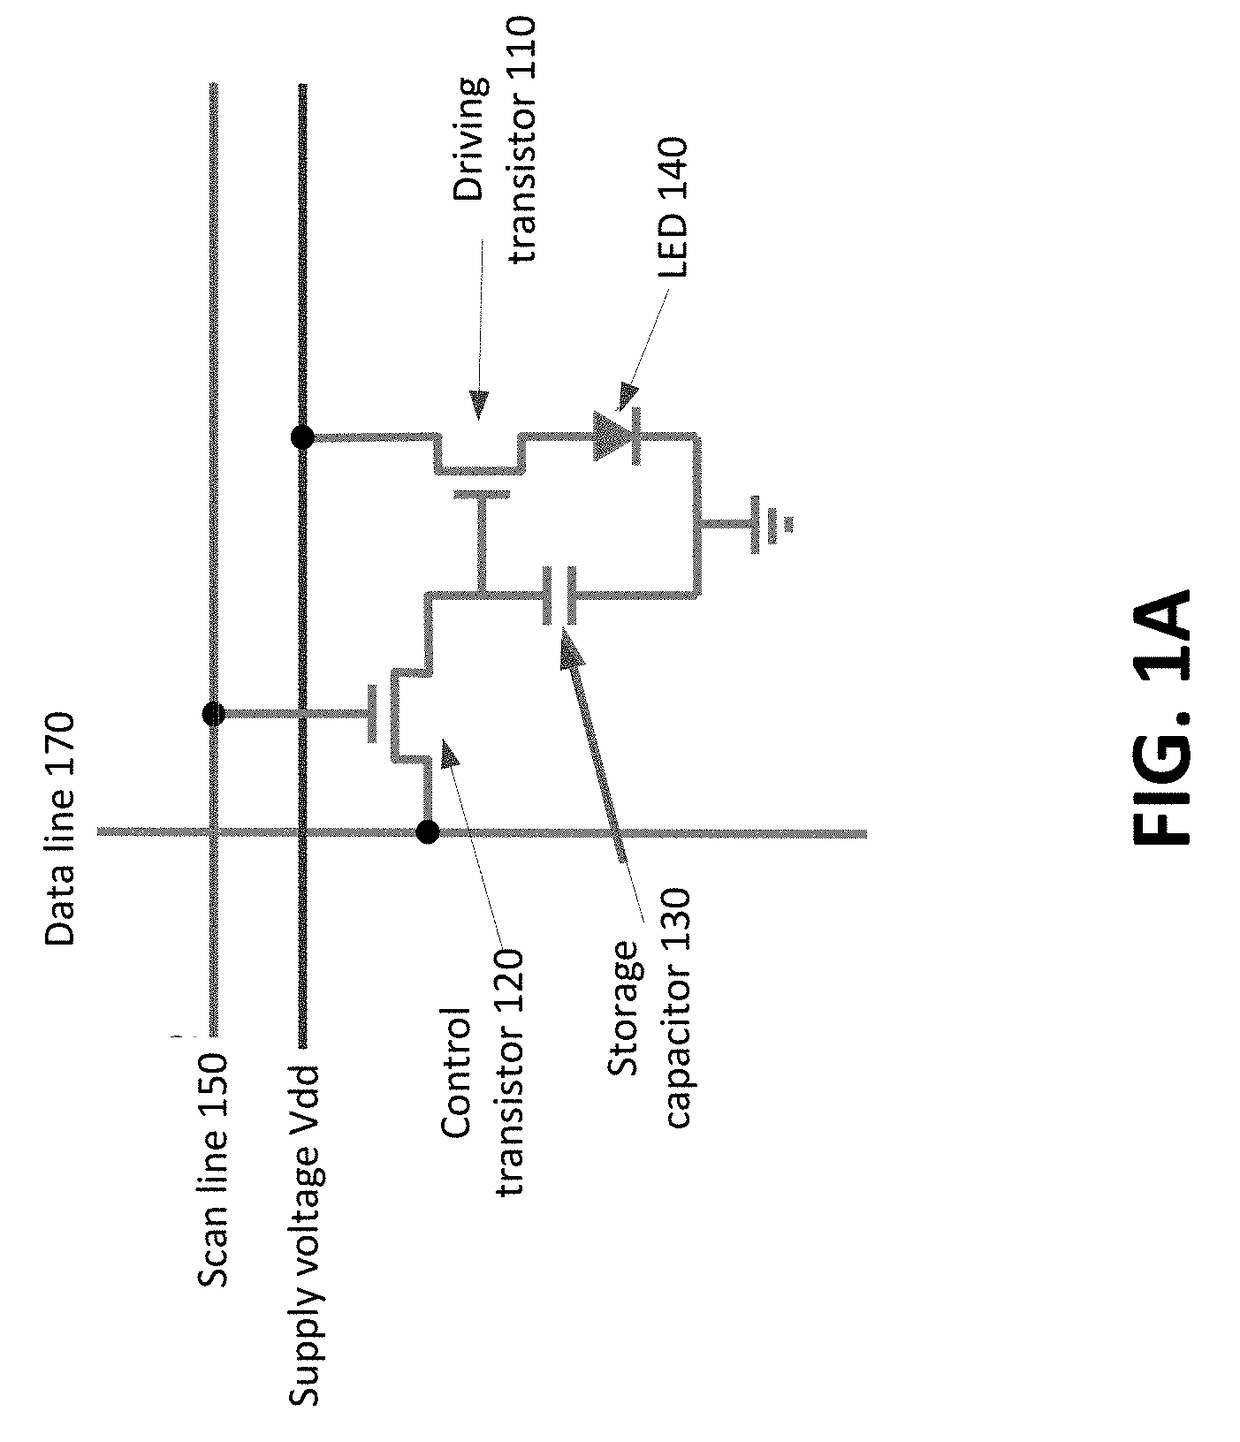 Making Semiconductor Devices with Alignment Bonding and Substrate Removal